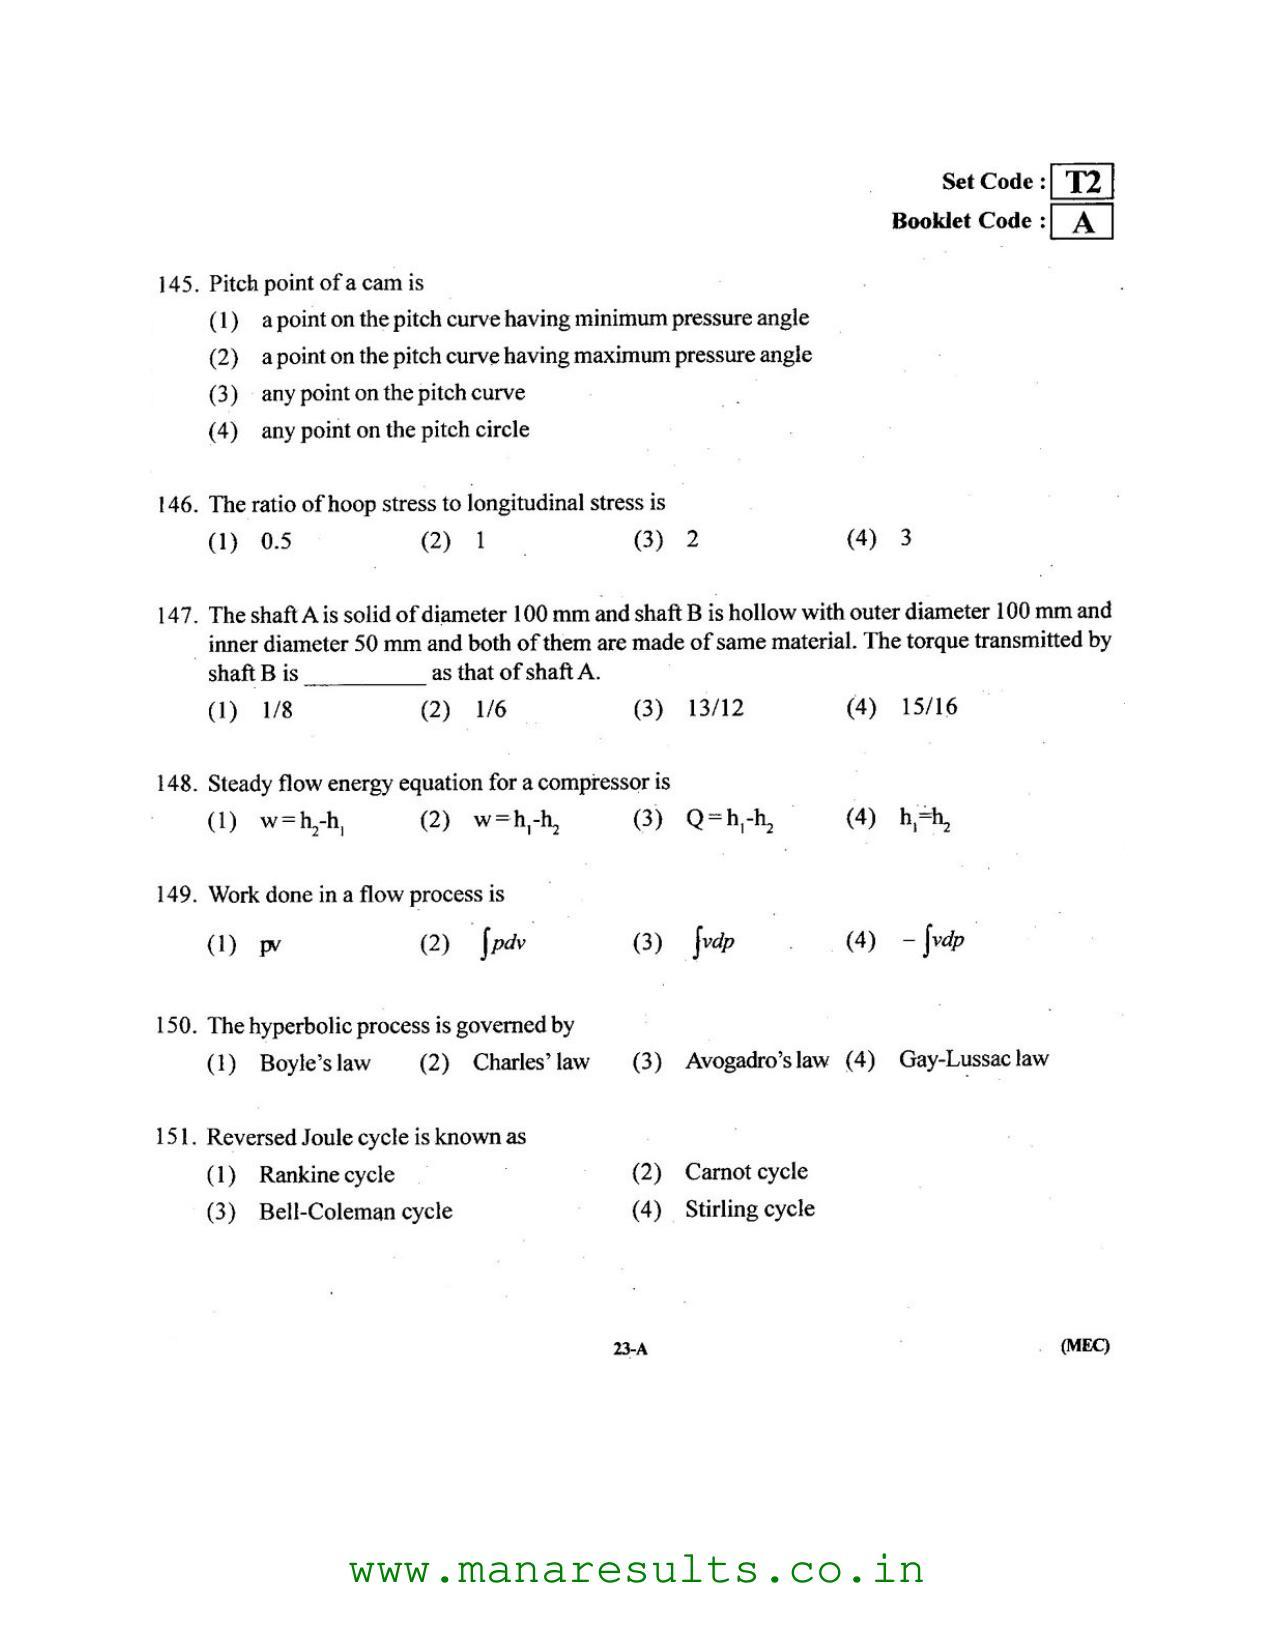 AP ECET 2016 Mechanical Engineering Old Previous Question Papers - Page 22